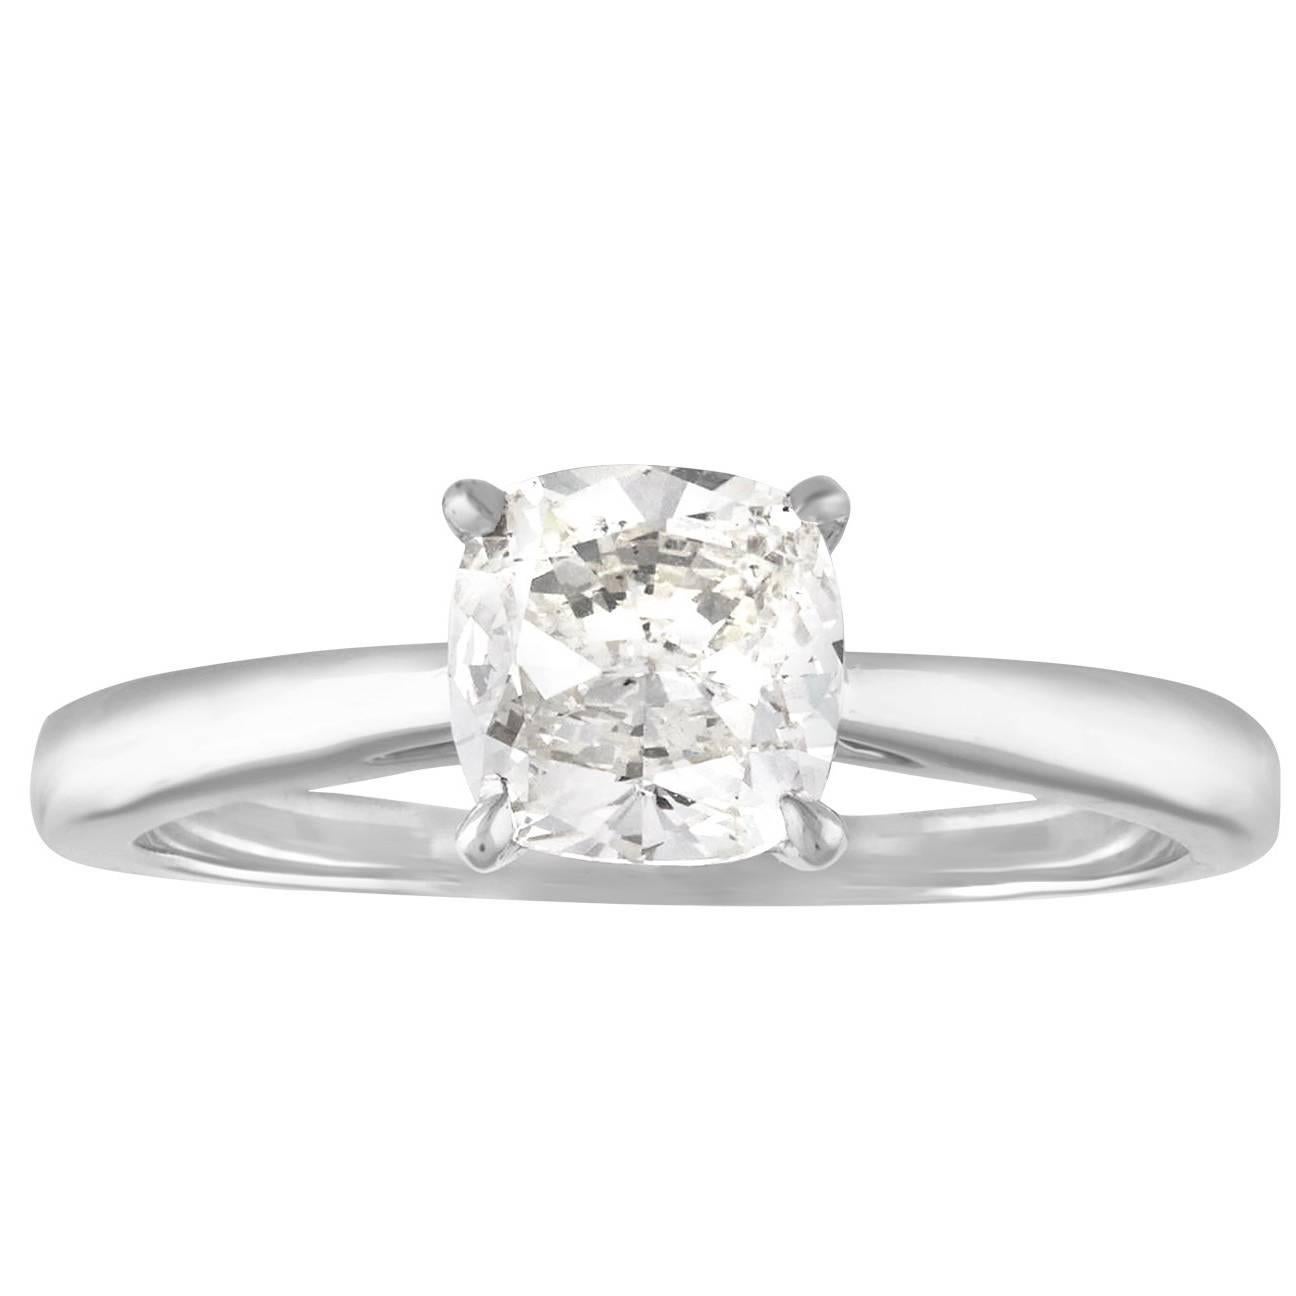 1.10 Carat Cushion Cut Diamond Engagement Gold Ring For Sale